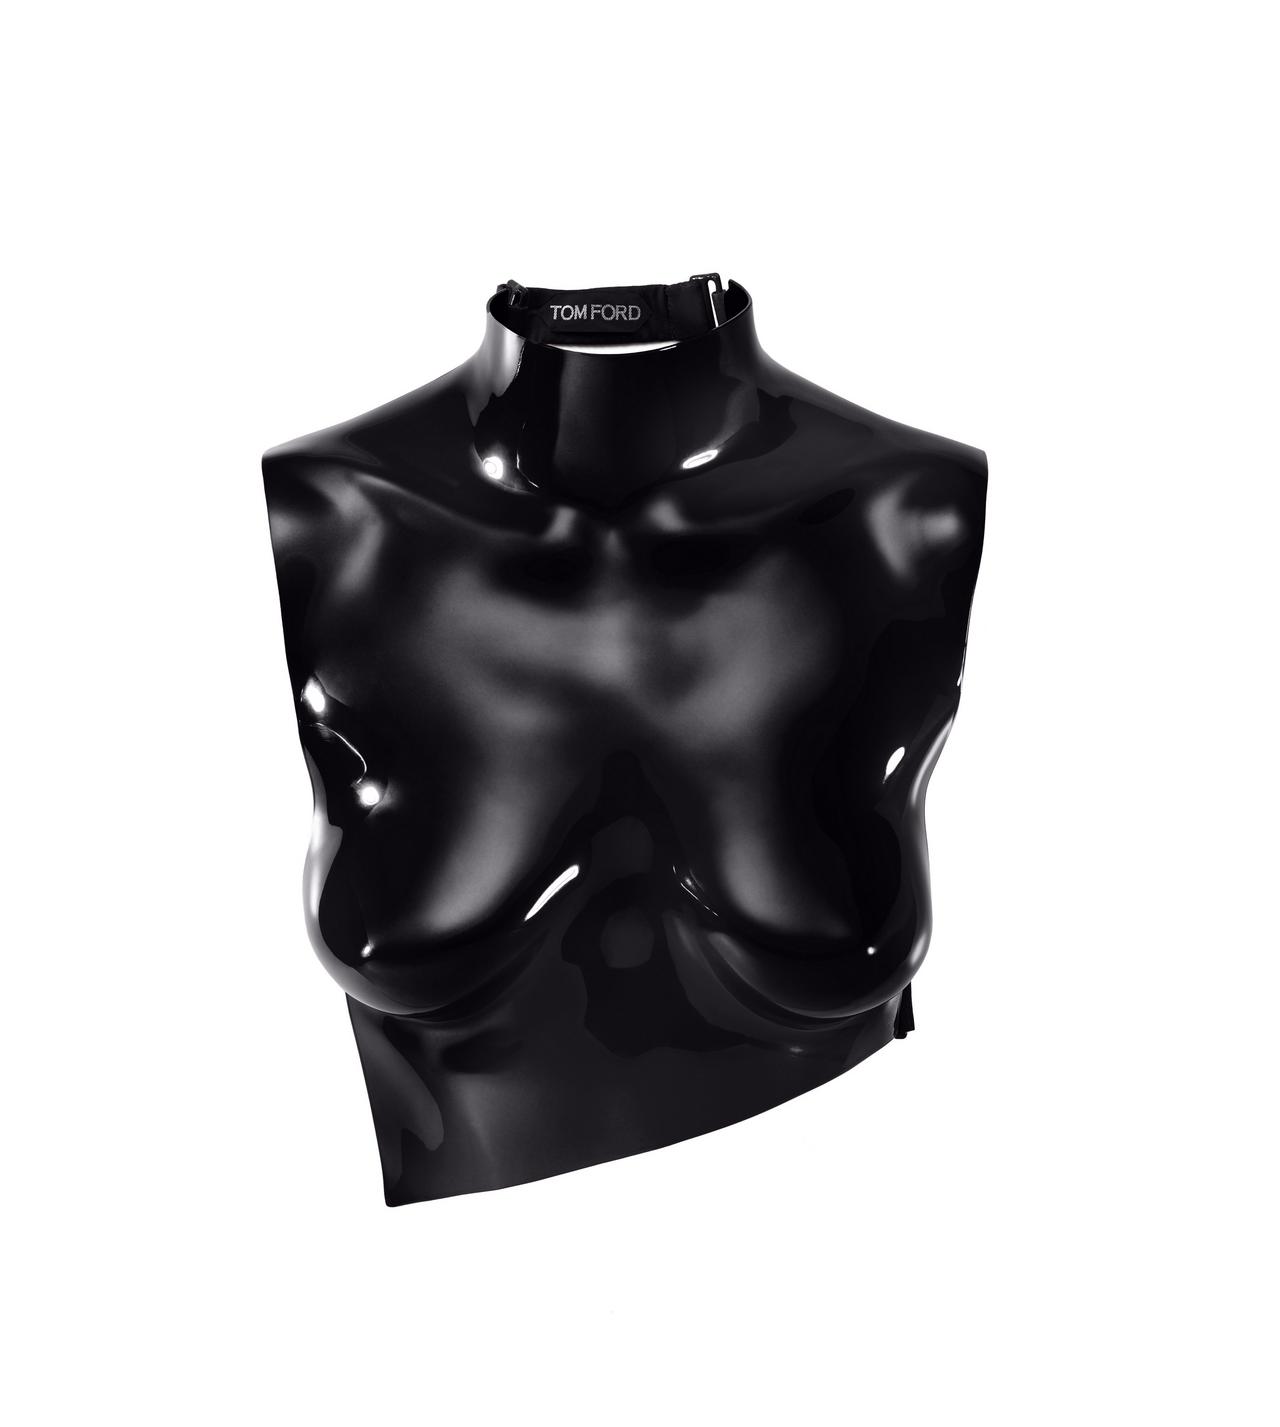 LACQUERED CHROME ACRYLIC ANATOMICAL BREASTPLATE